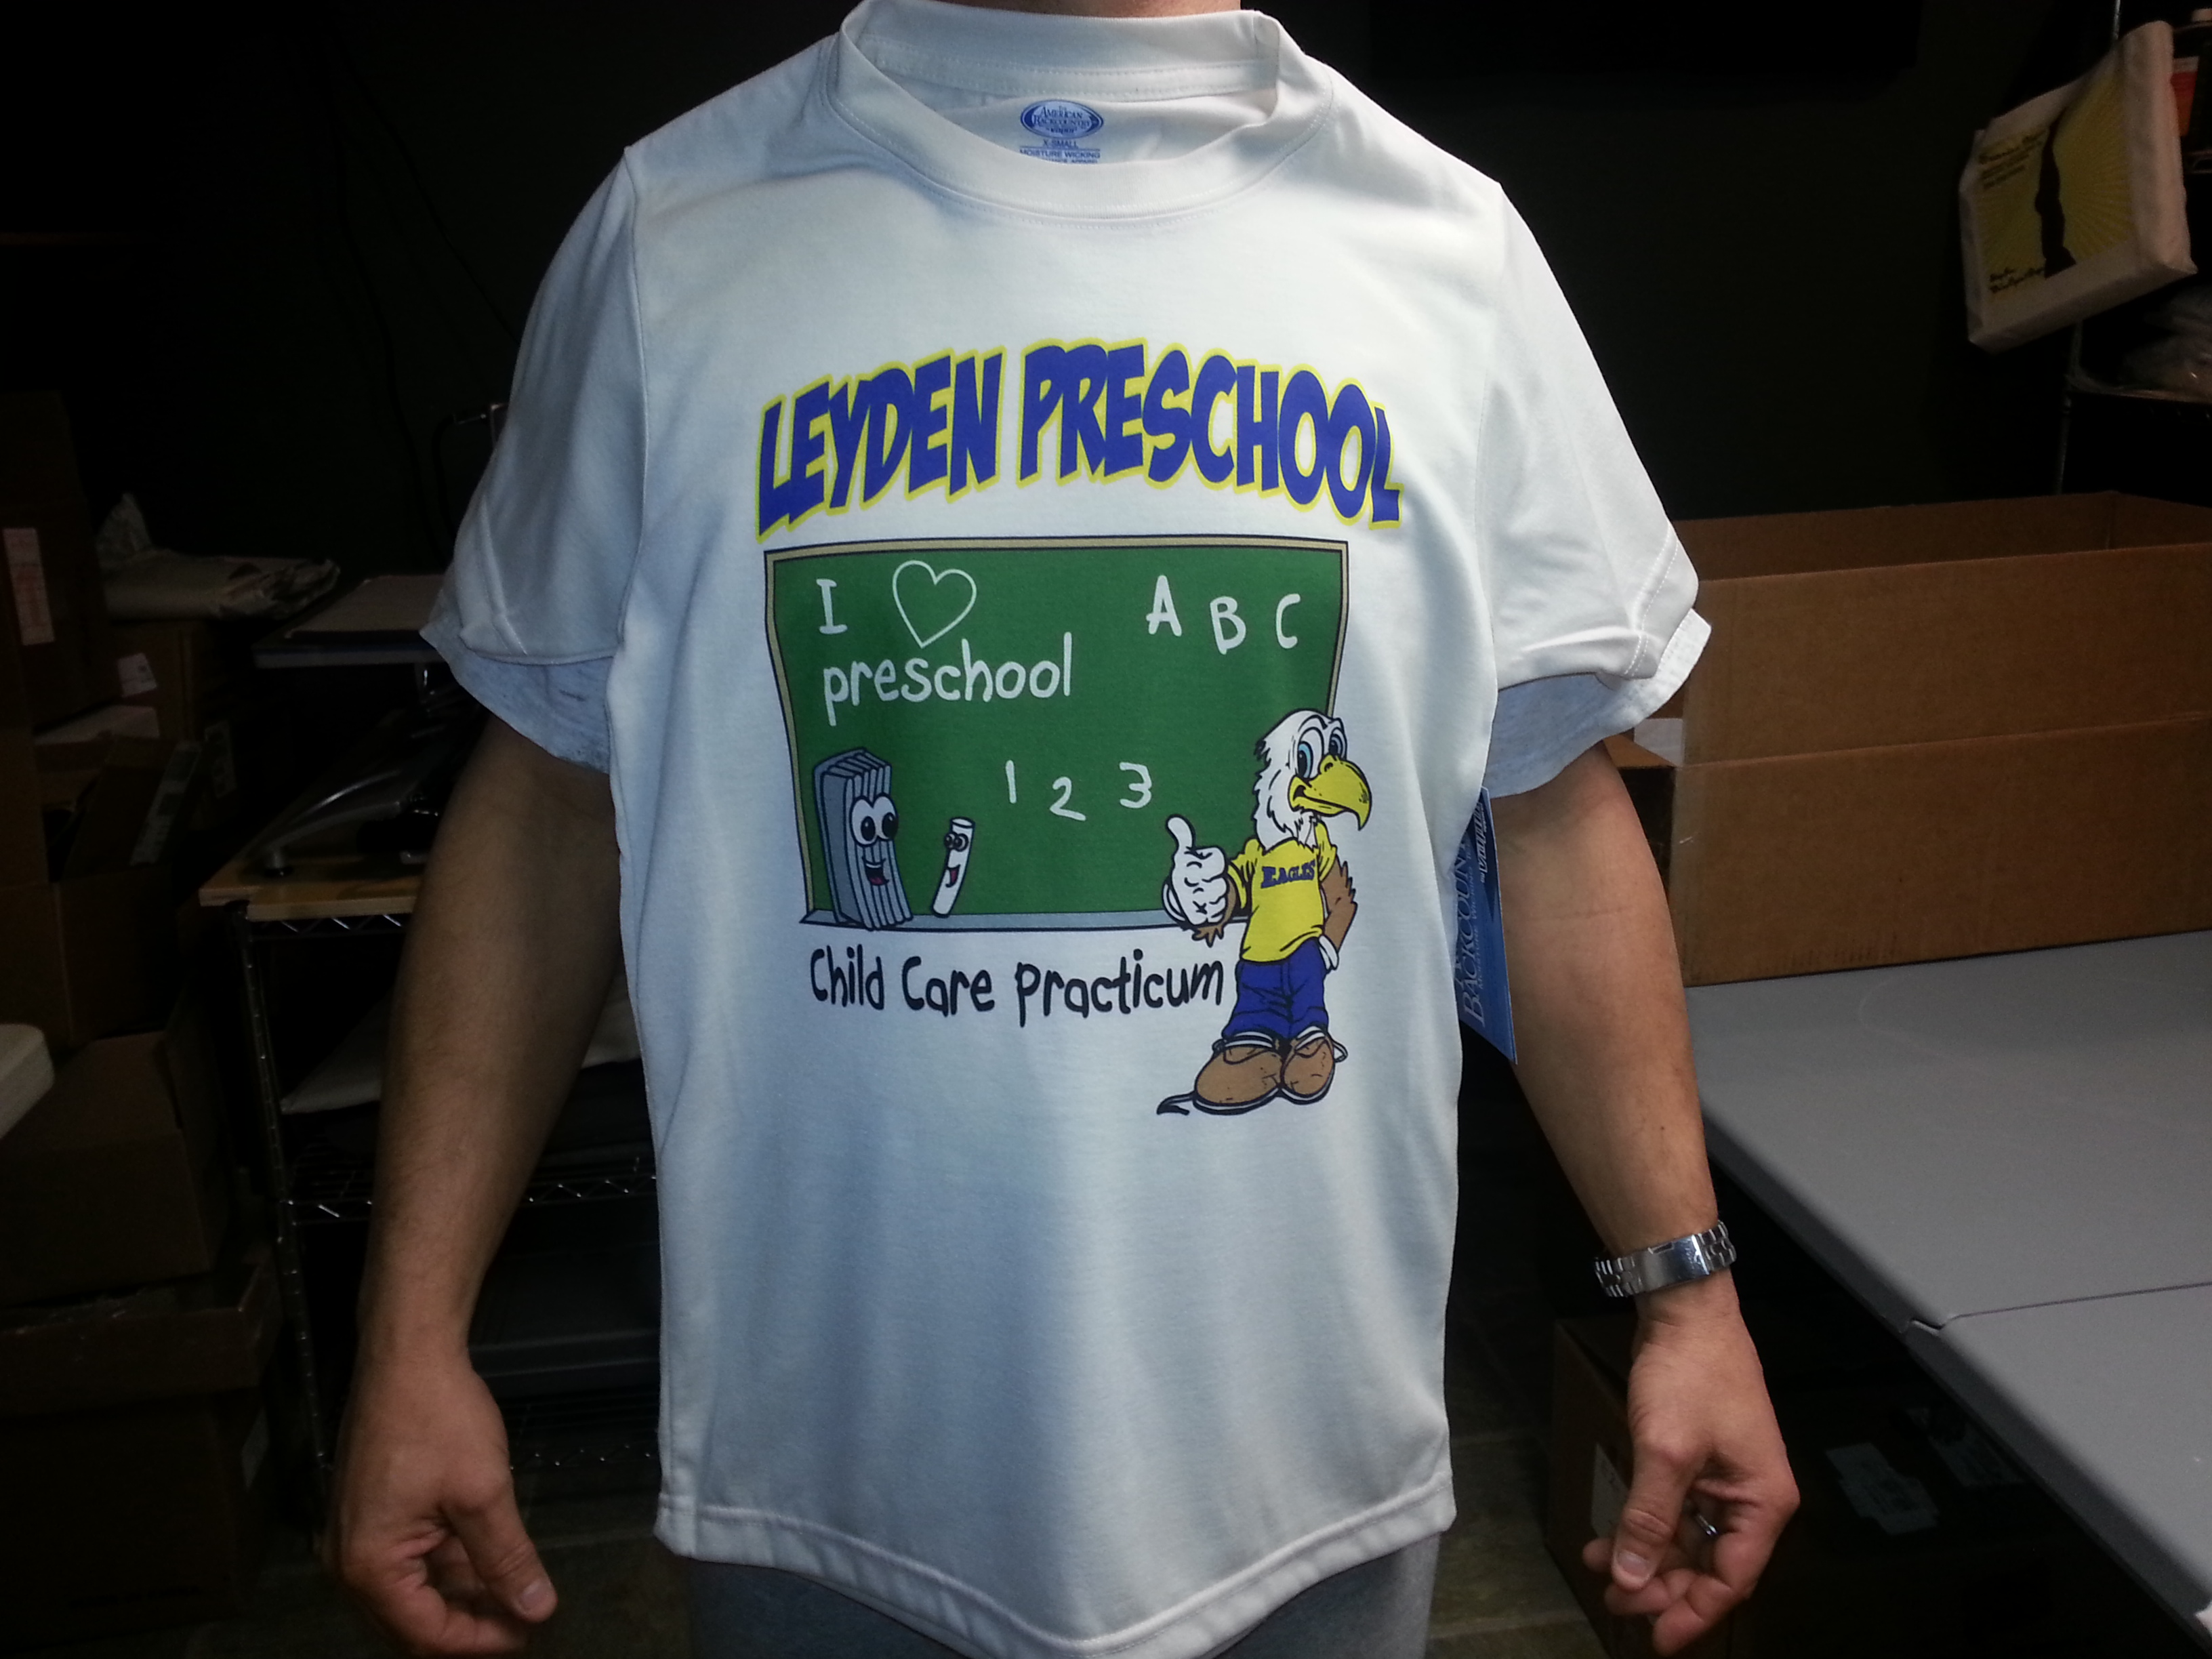 Leyden Preschool T-shirt made with sublimation printing